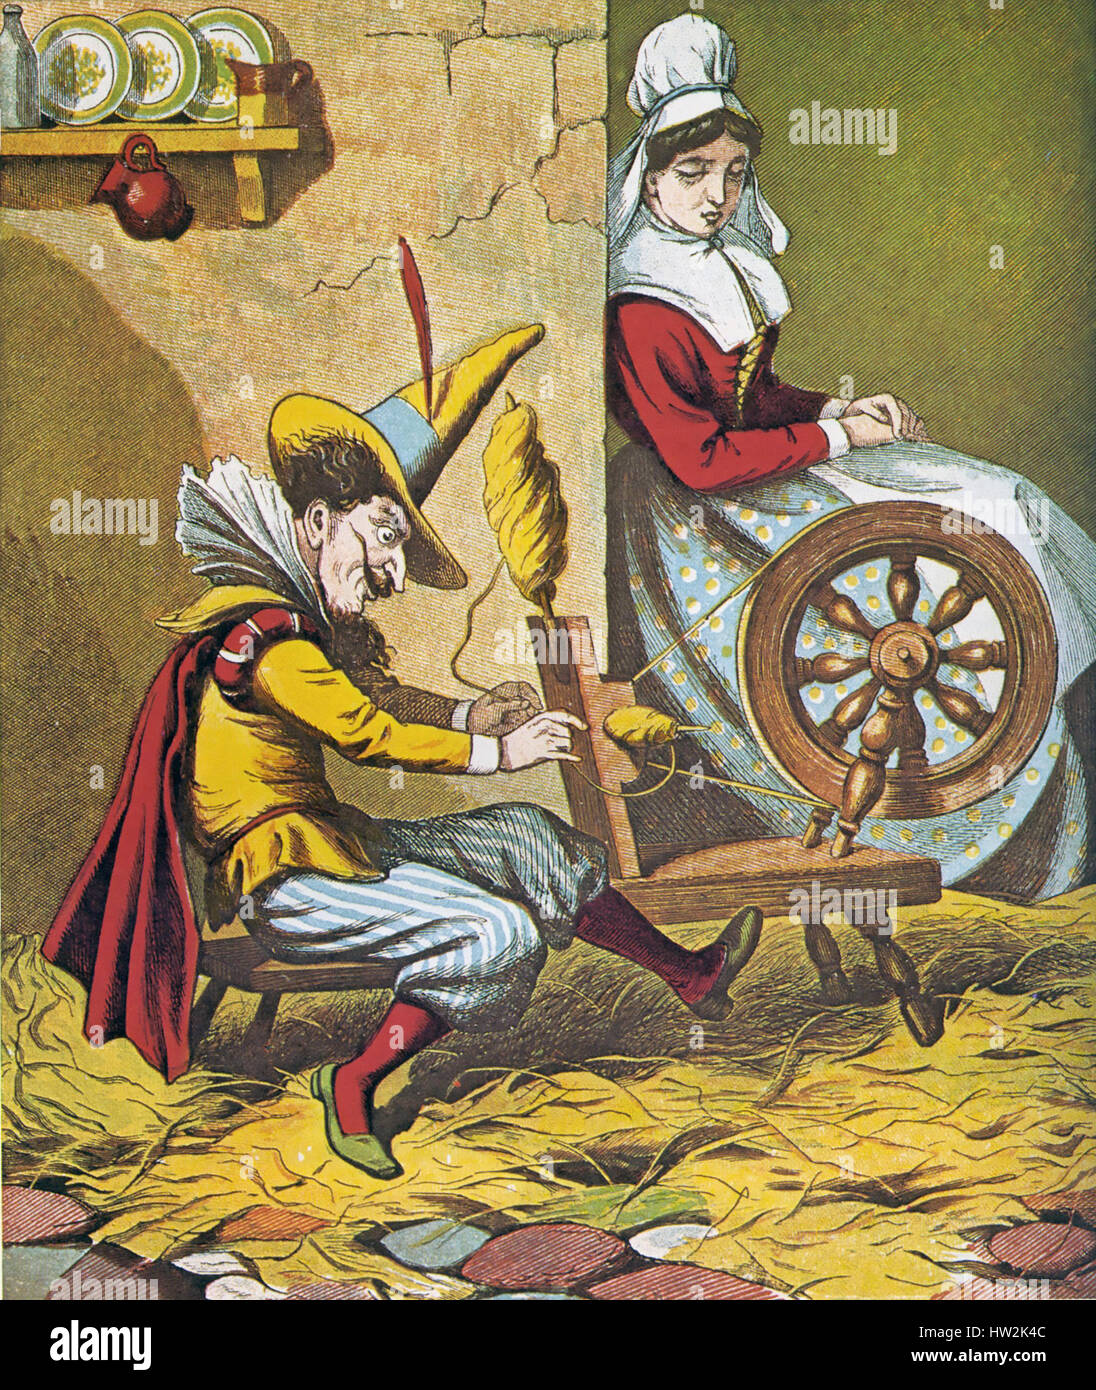 RUMPELSTILTSKIN fairy tale collected by the Brothers Grimm. Here he helps the miller's daughter with her spinning in an 1870 illustration from Routledge's Coloured Picture Book Stock Photo